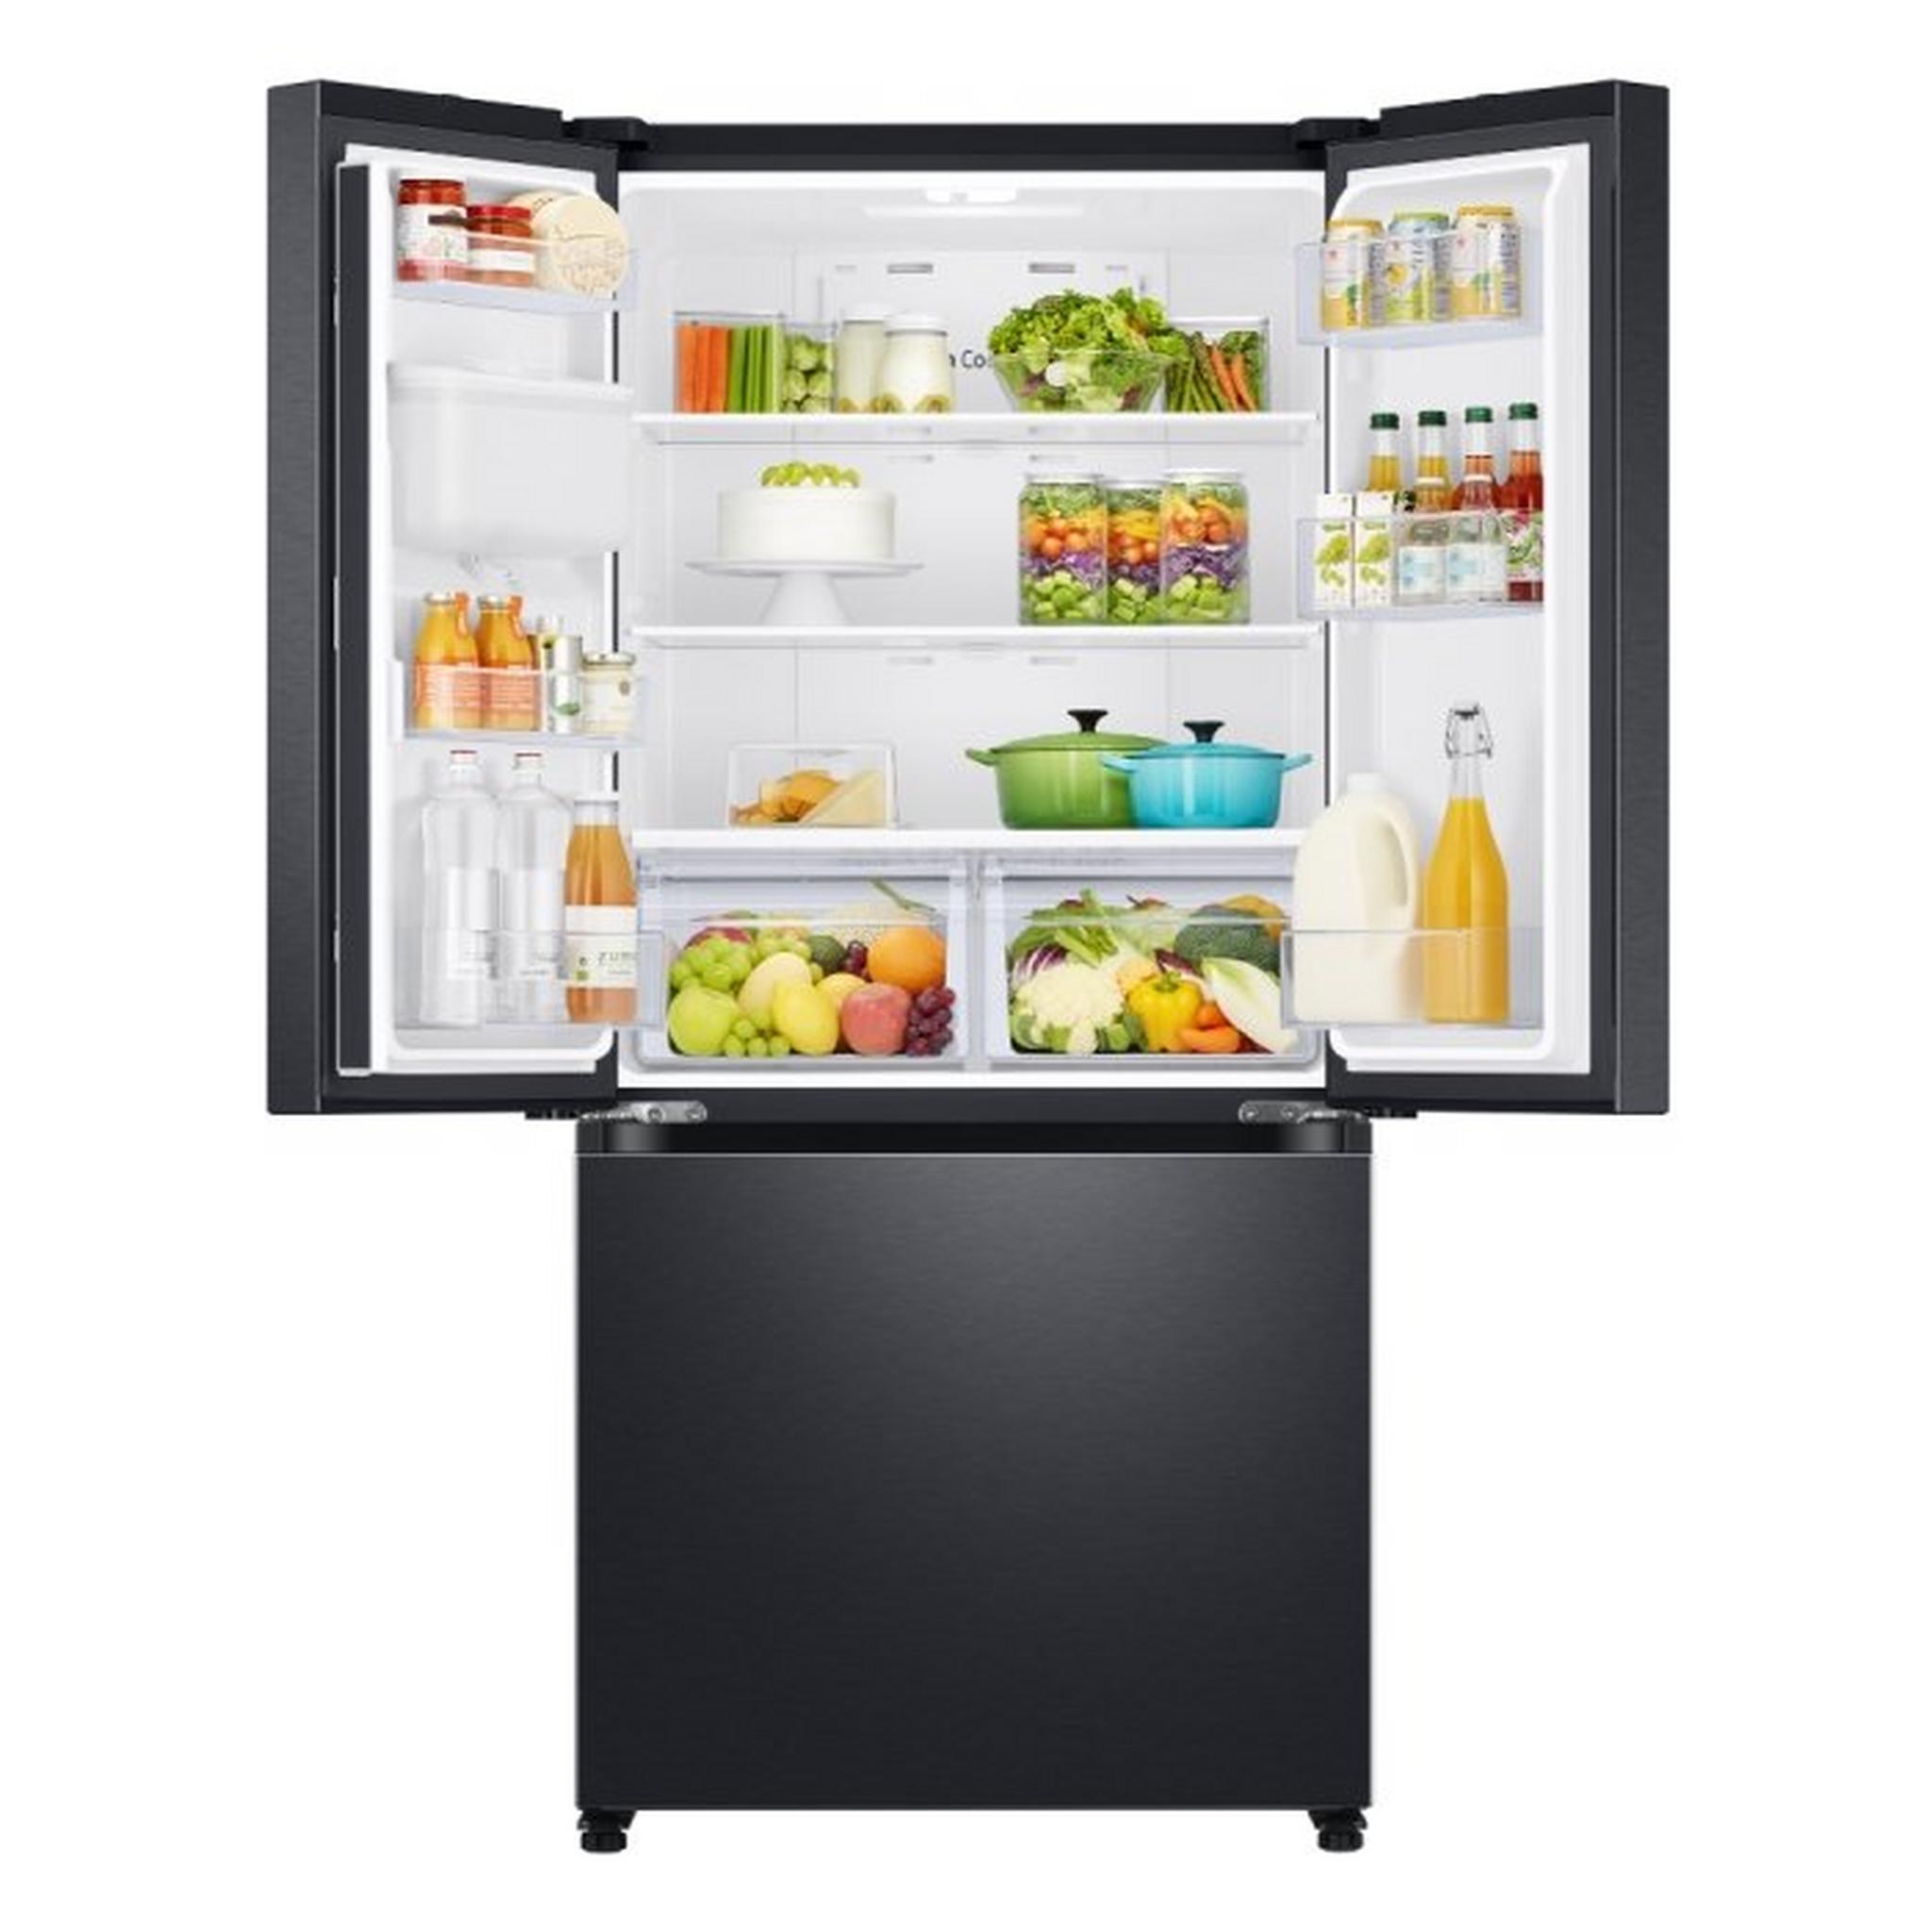 Samsung 20CFT French Door Refrigerator with Water Dispenser (RF49A5302B1) - Silver